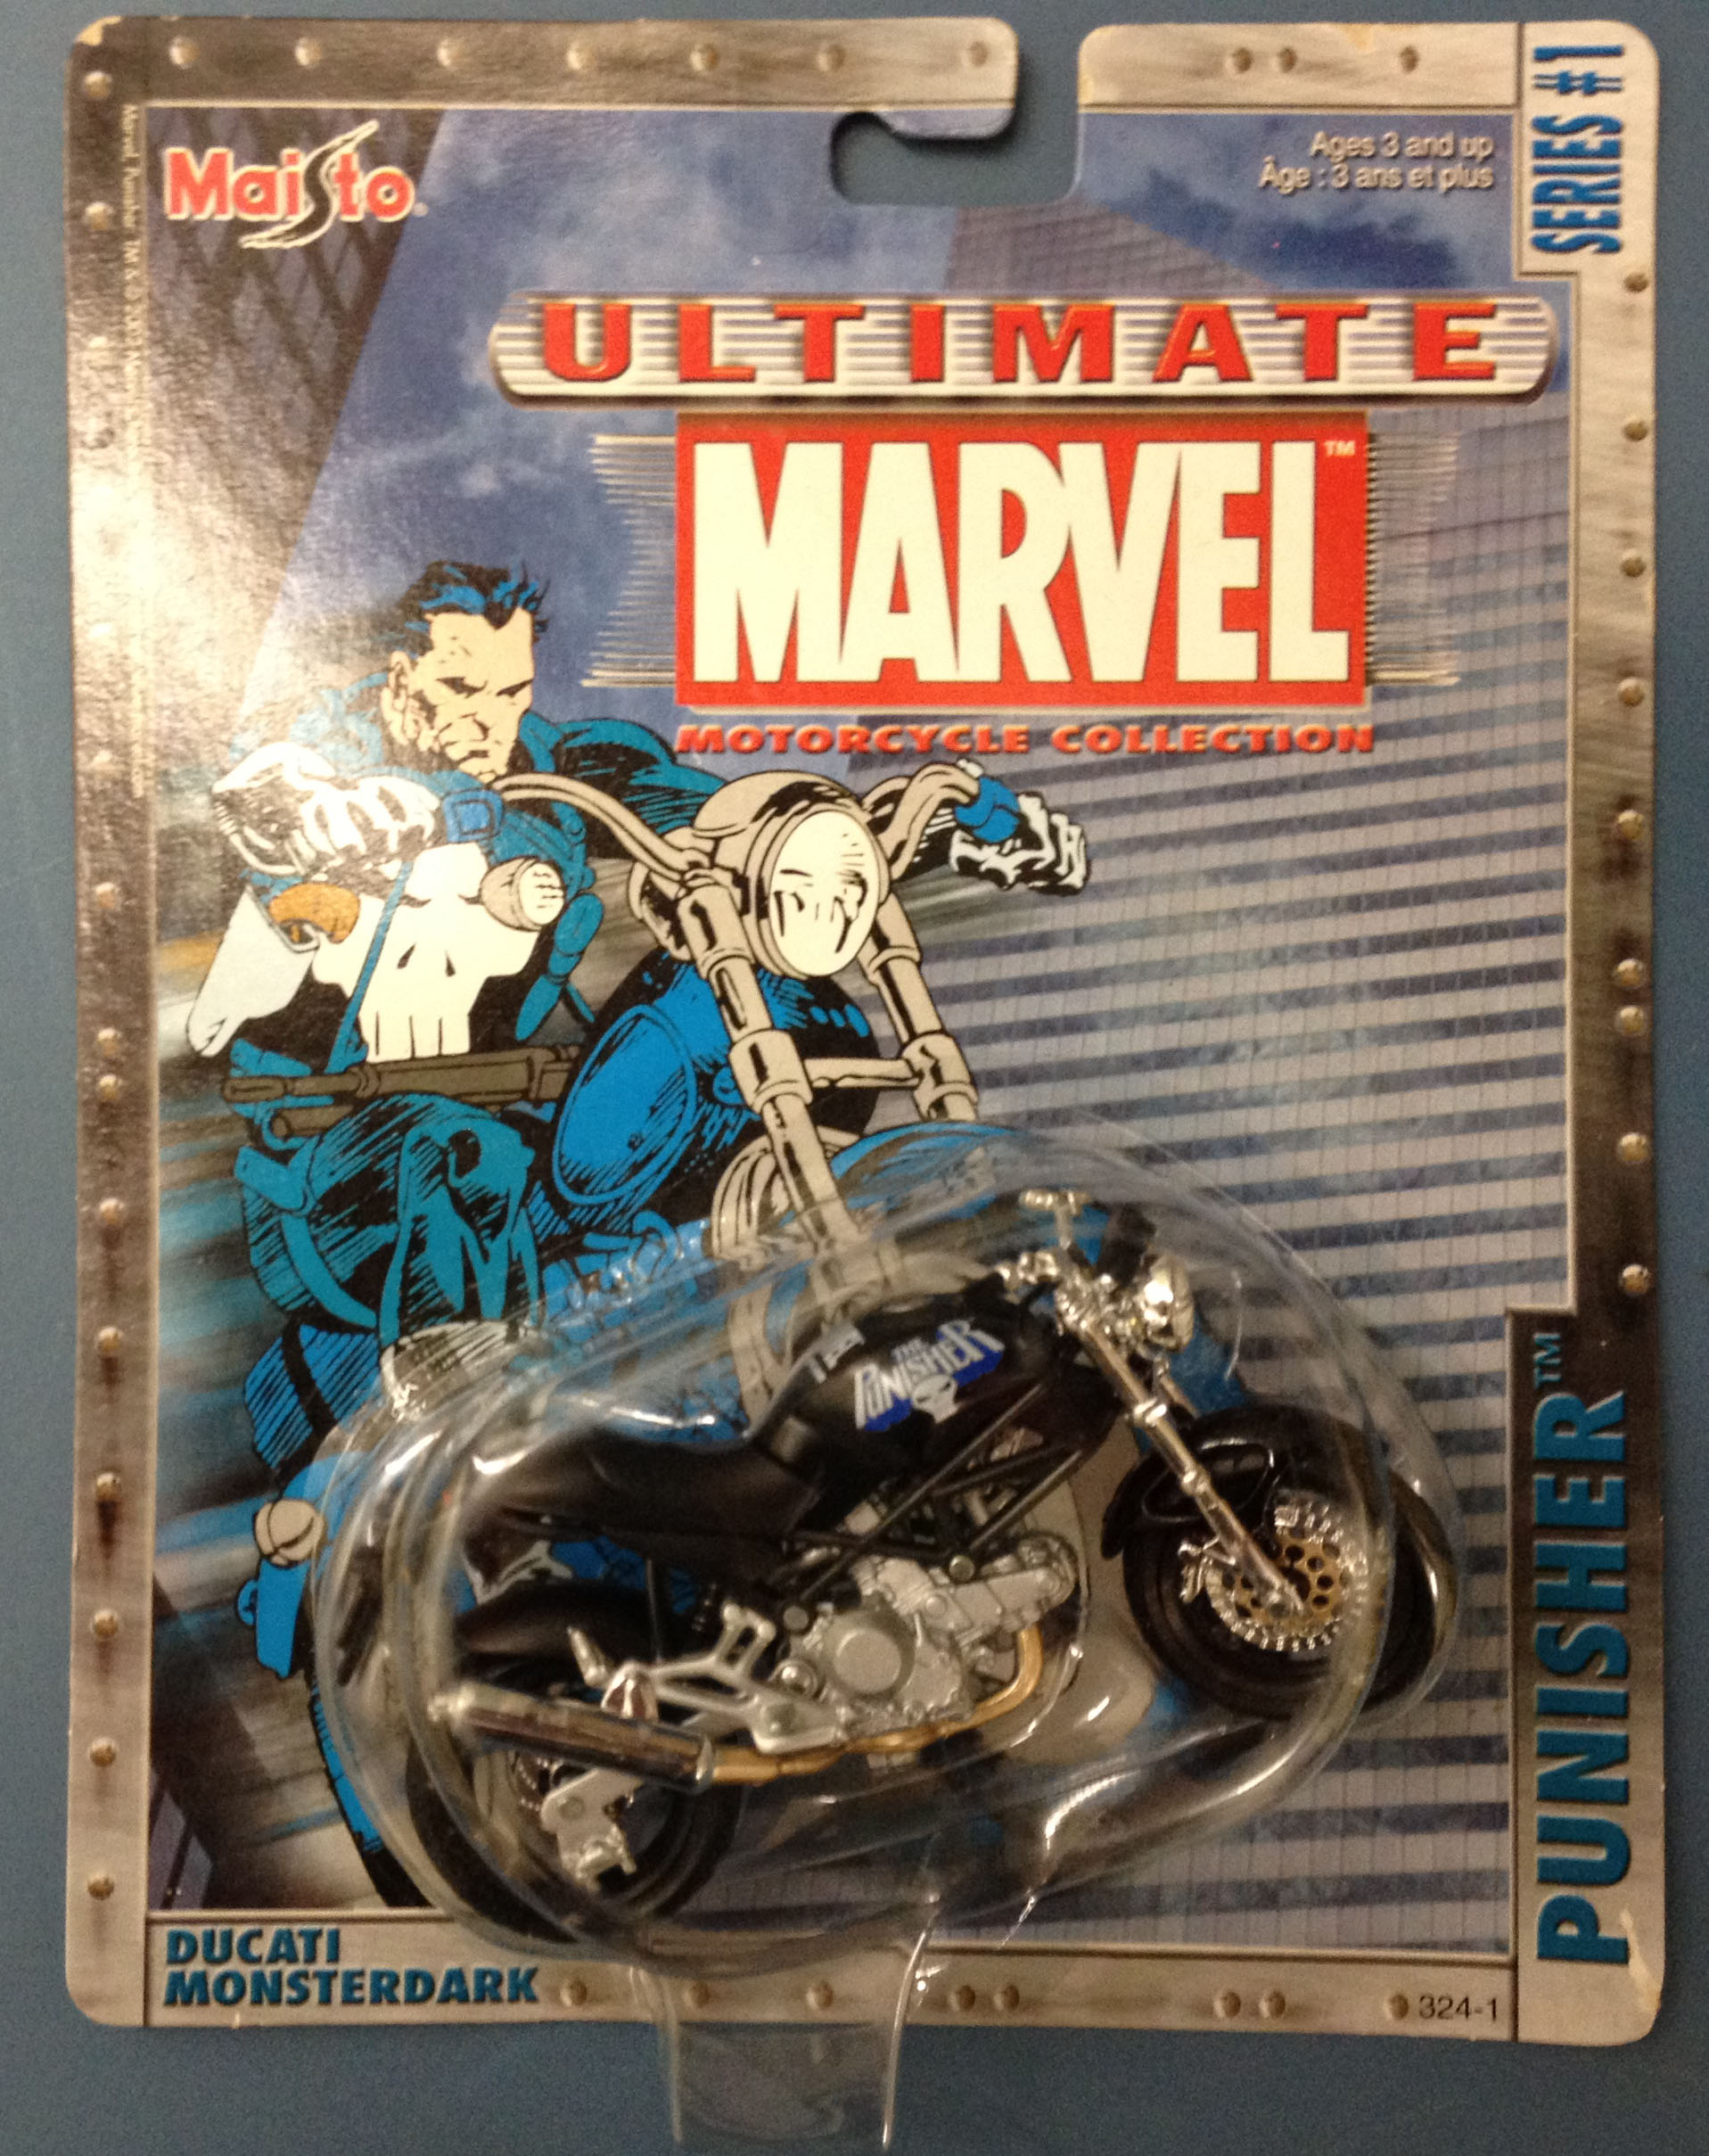 Wolverine Triumph Tiger M5 Maisto Ultimate Marvel Motorcycle Collection 